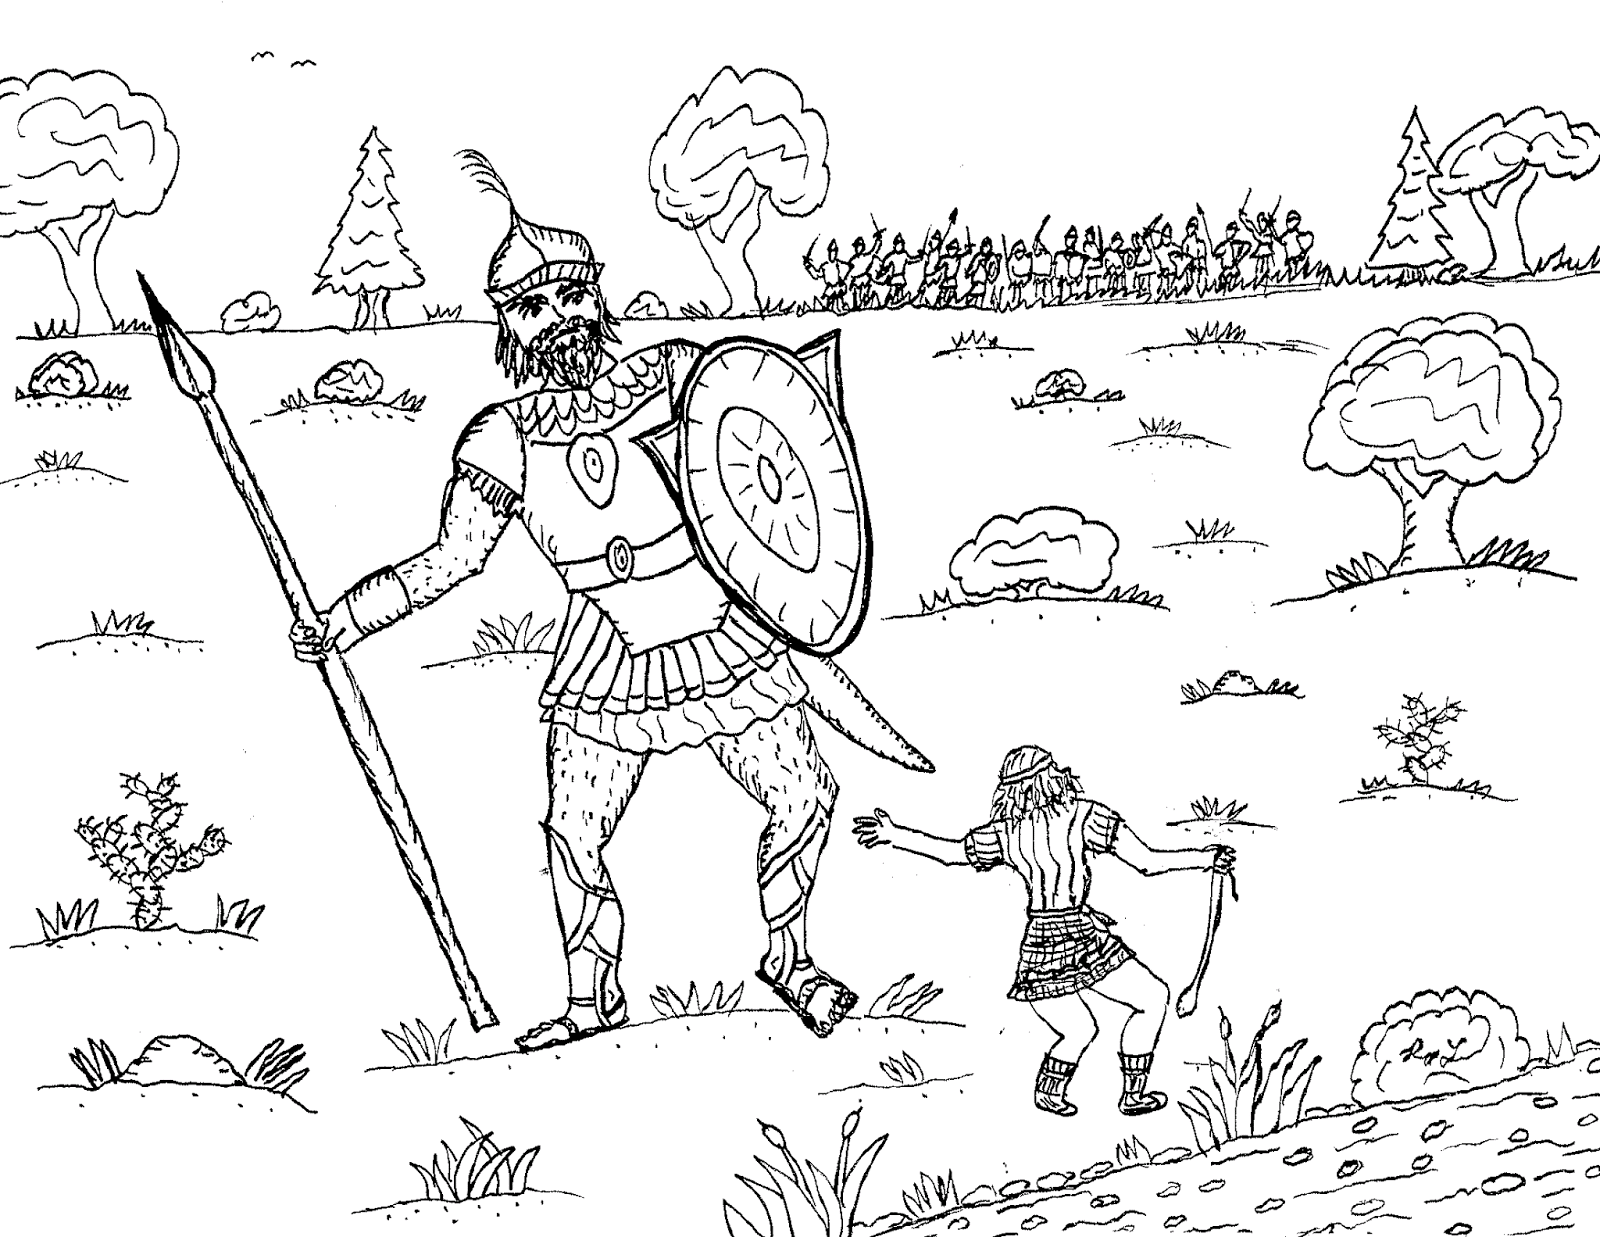 Robin's Great Coloring Pages: David and Goliath